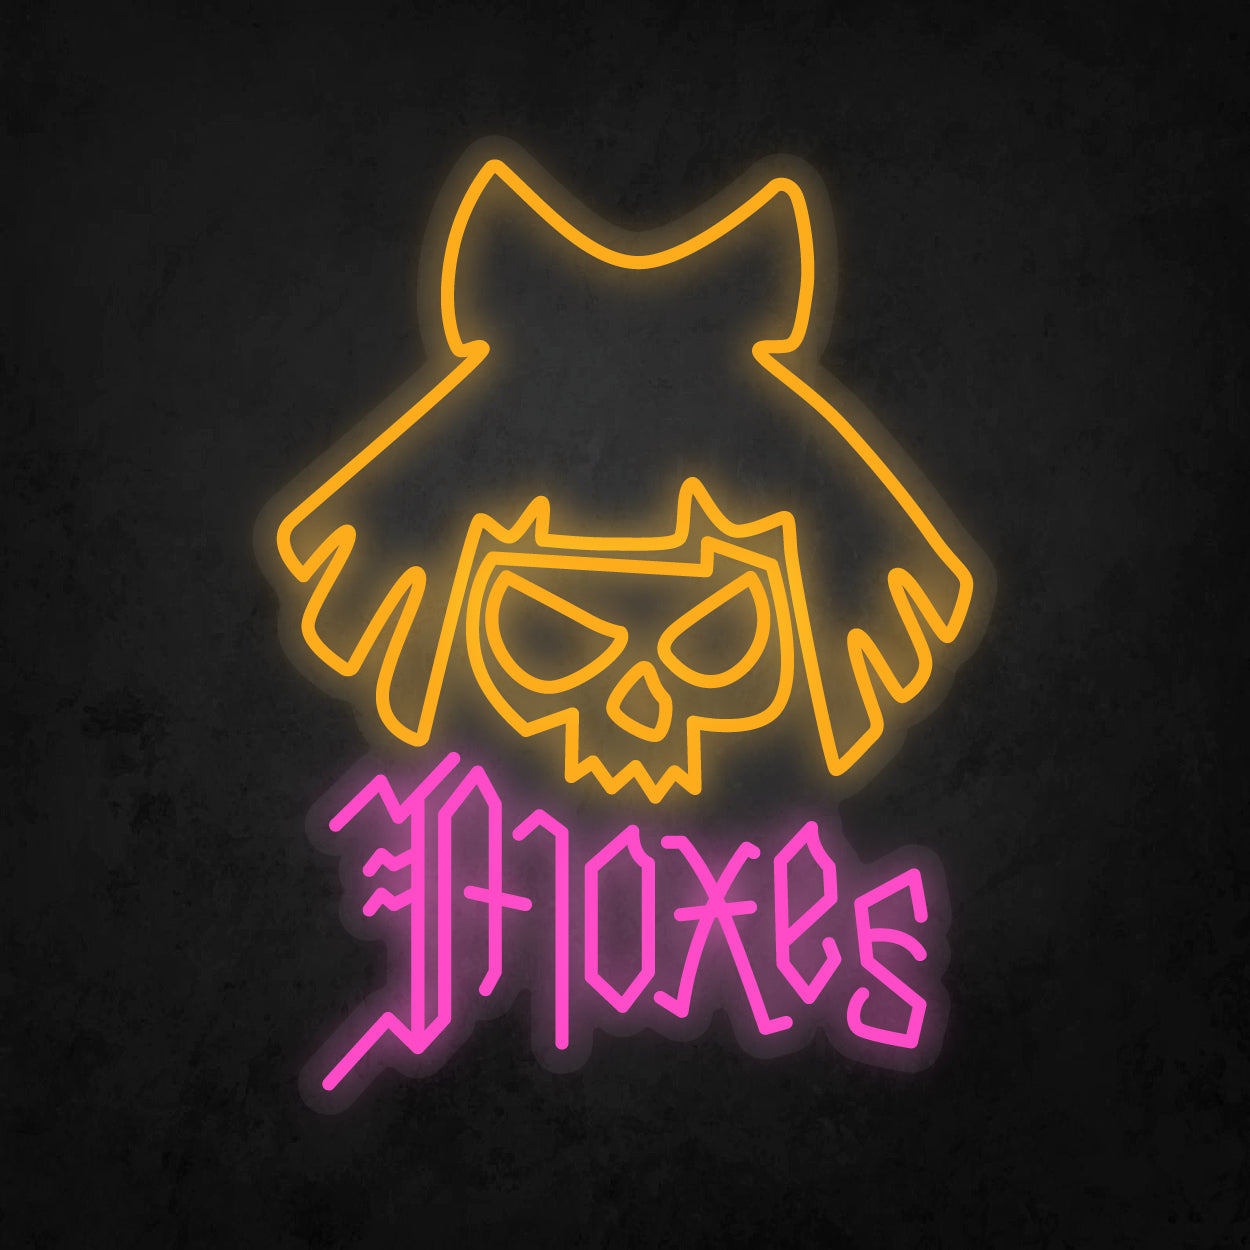 LED Neon Sign - Cyberpunk - Moxes